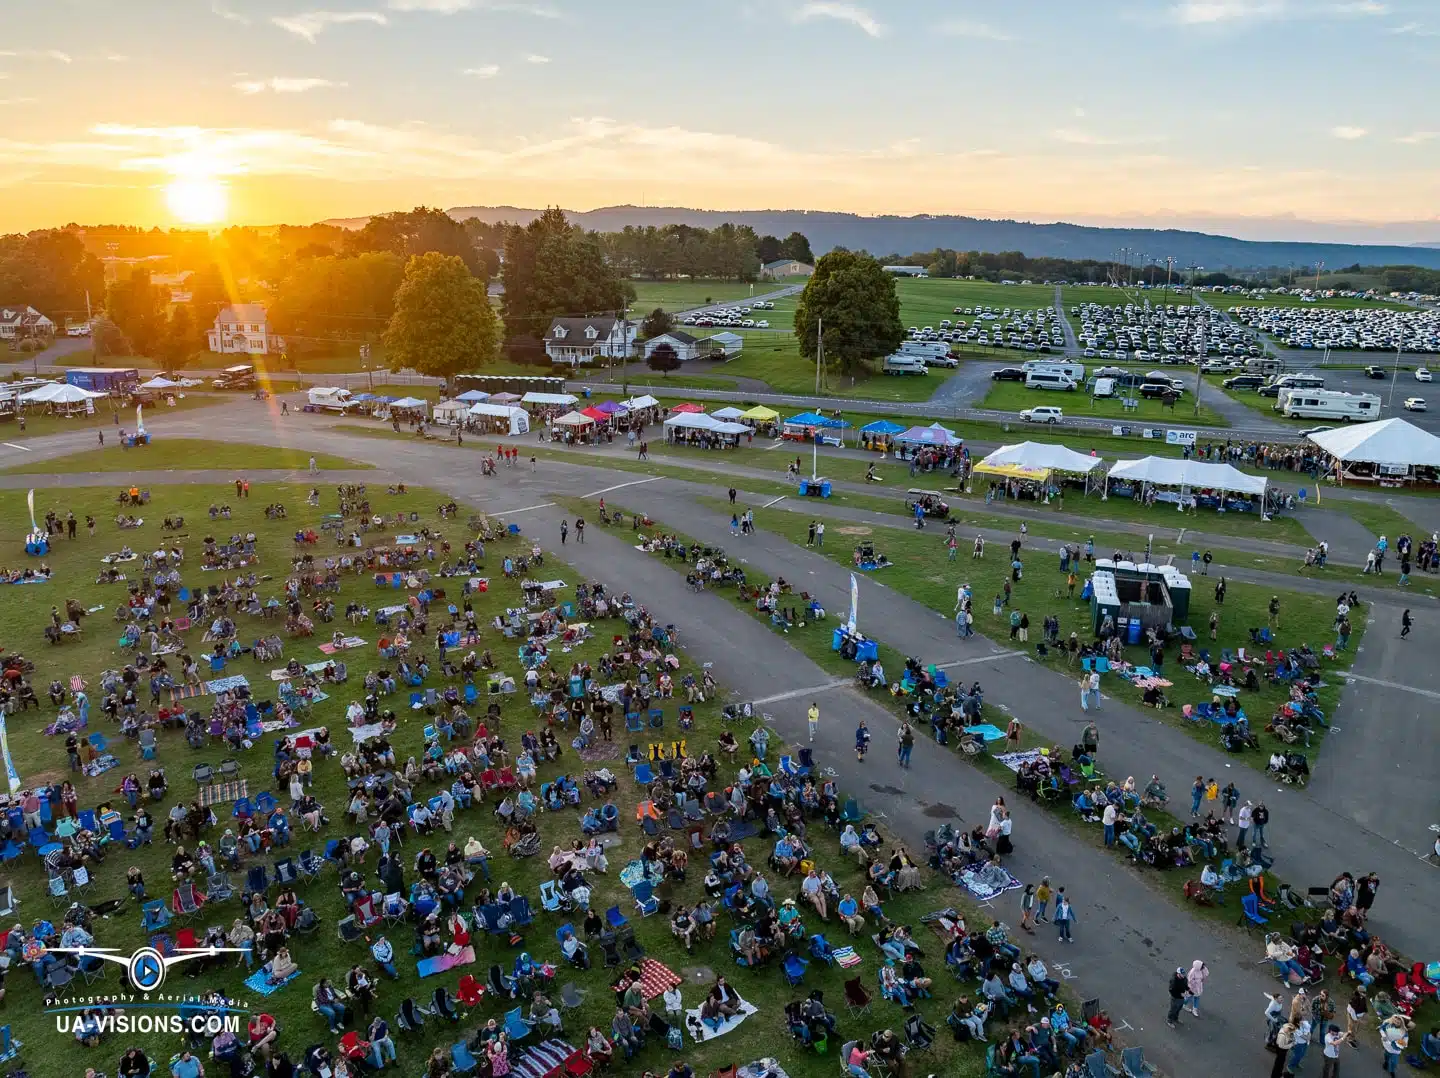 The golden hour casts its warm embrace over the Healing Appalachia festival attendees.